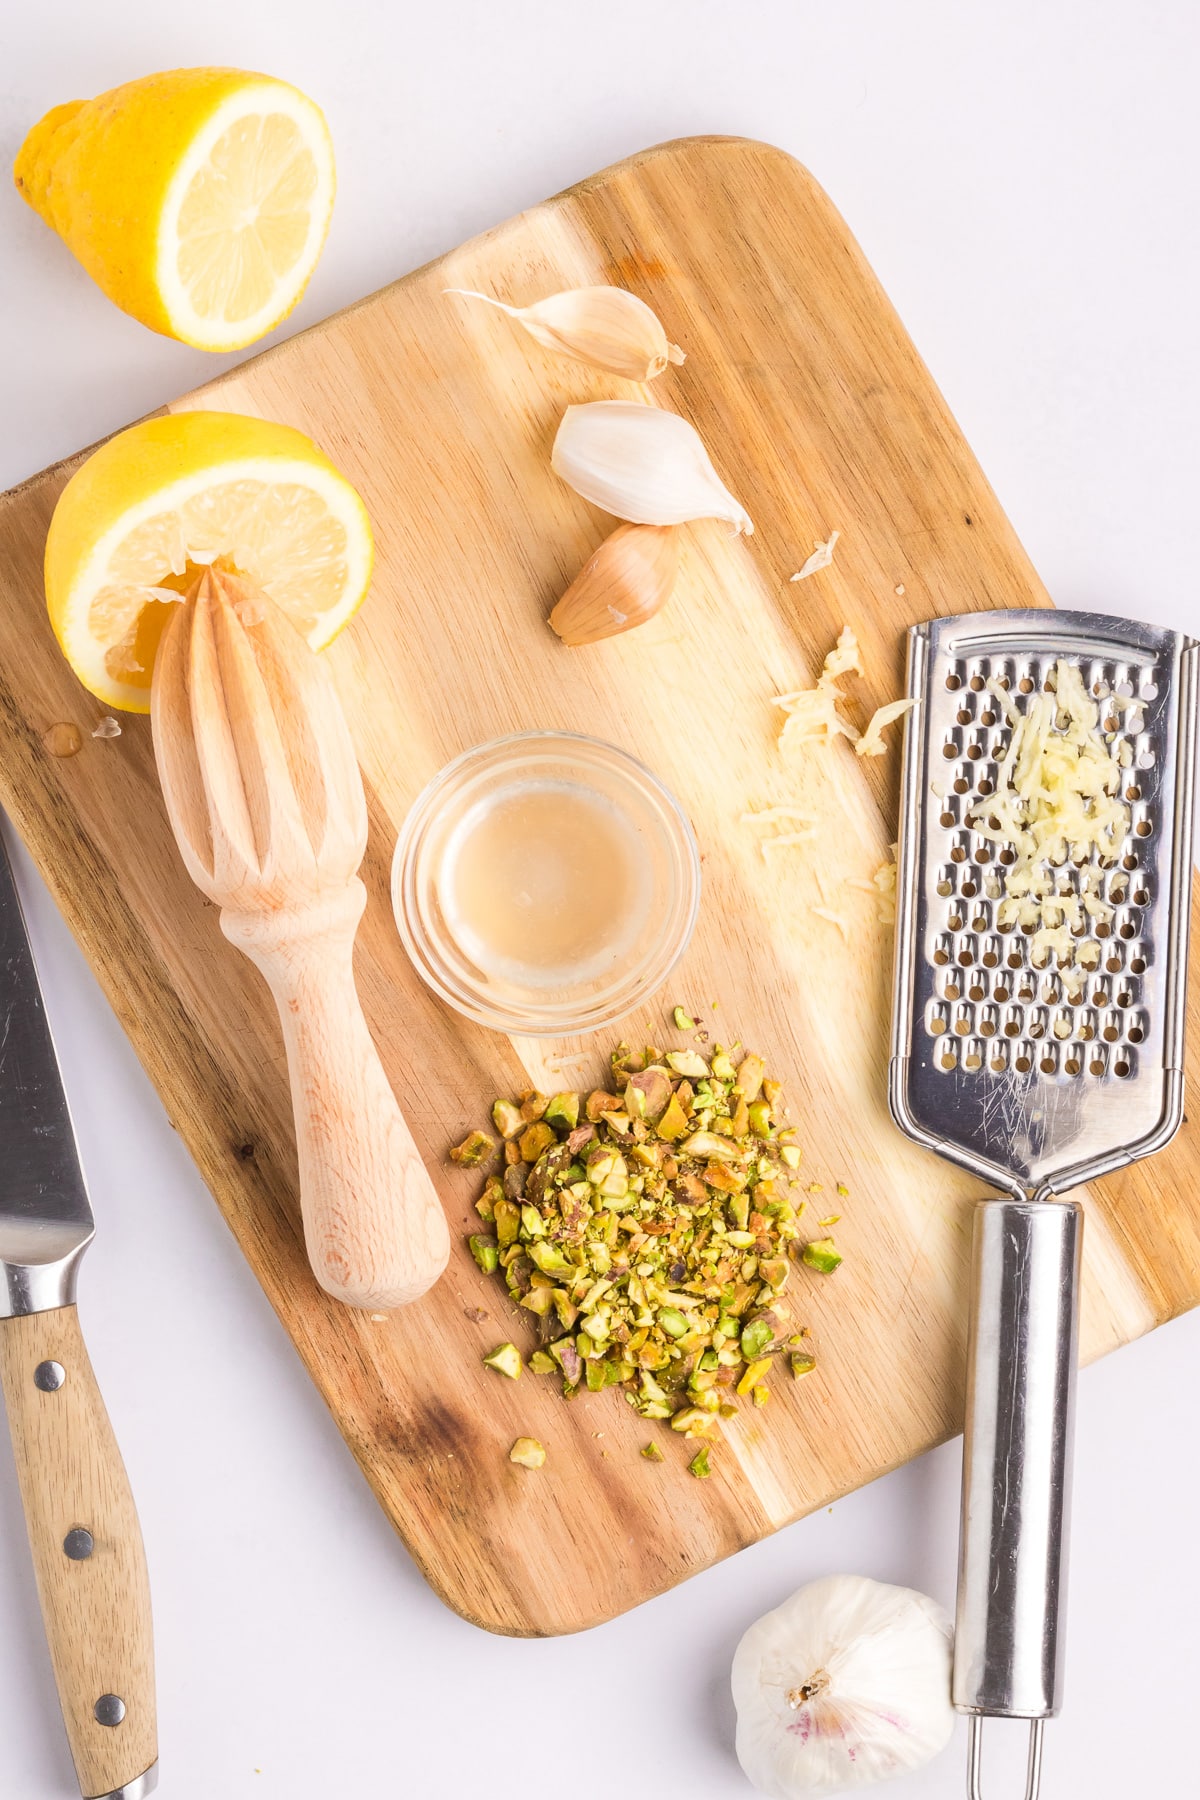 A cutting board with chopped pistachips, grated parmesan cheese, garlic cloves and lemon halves.